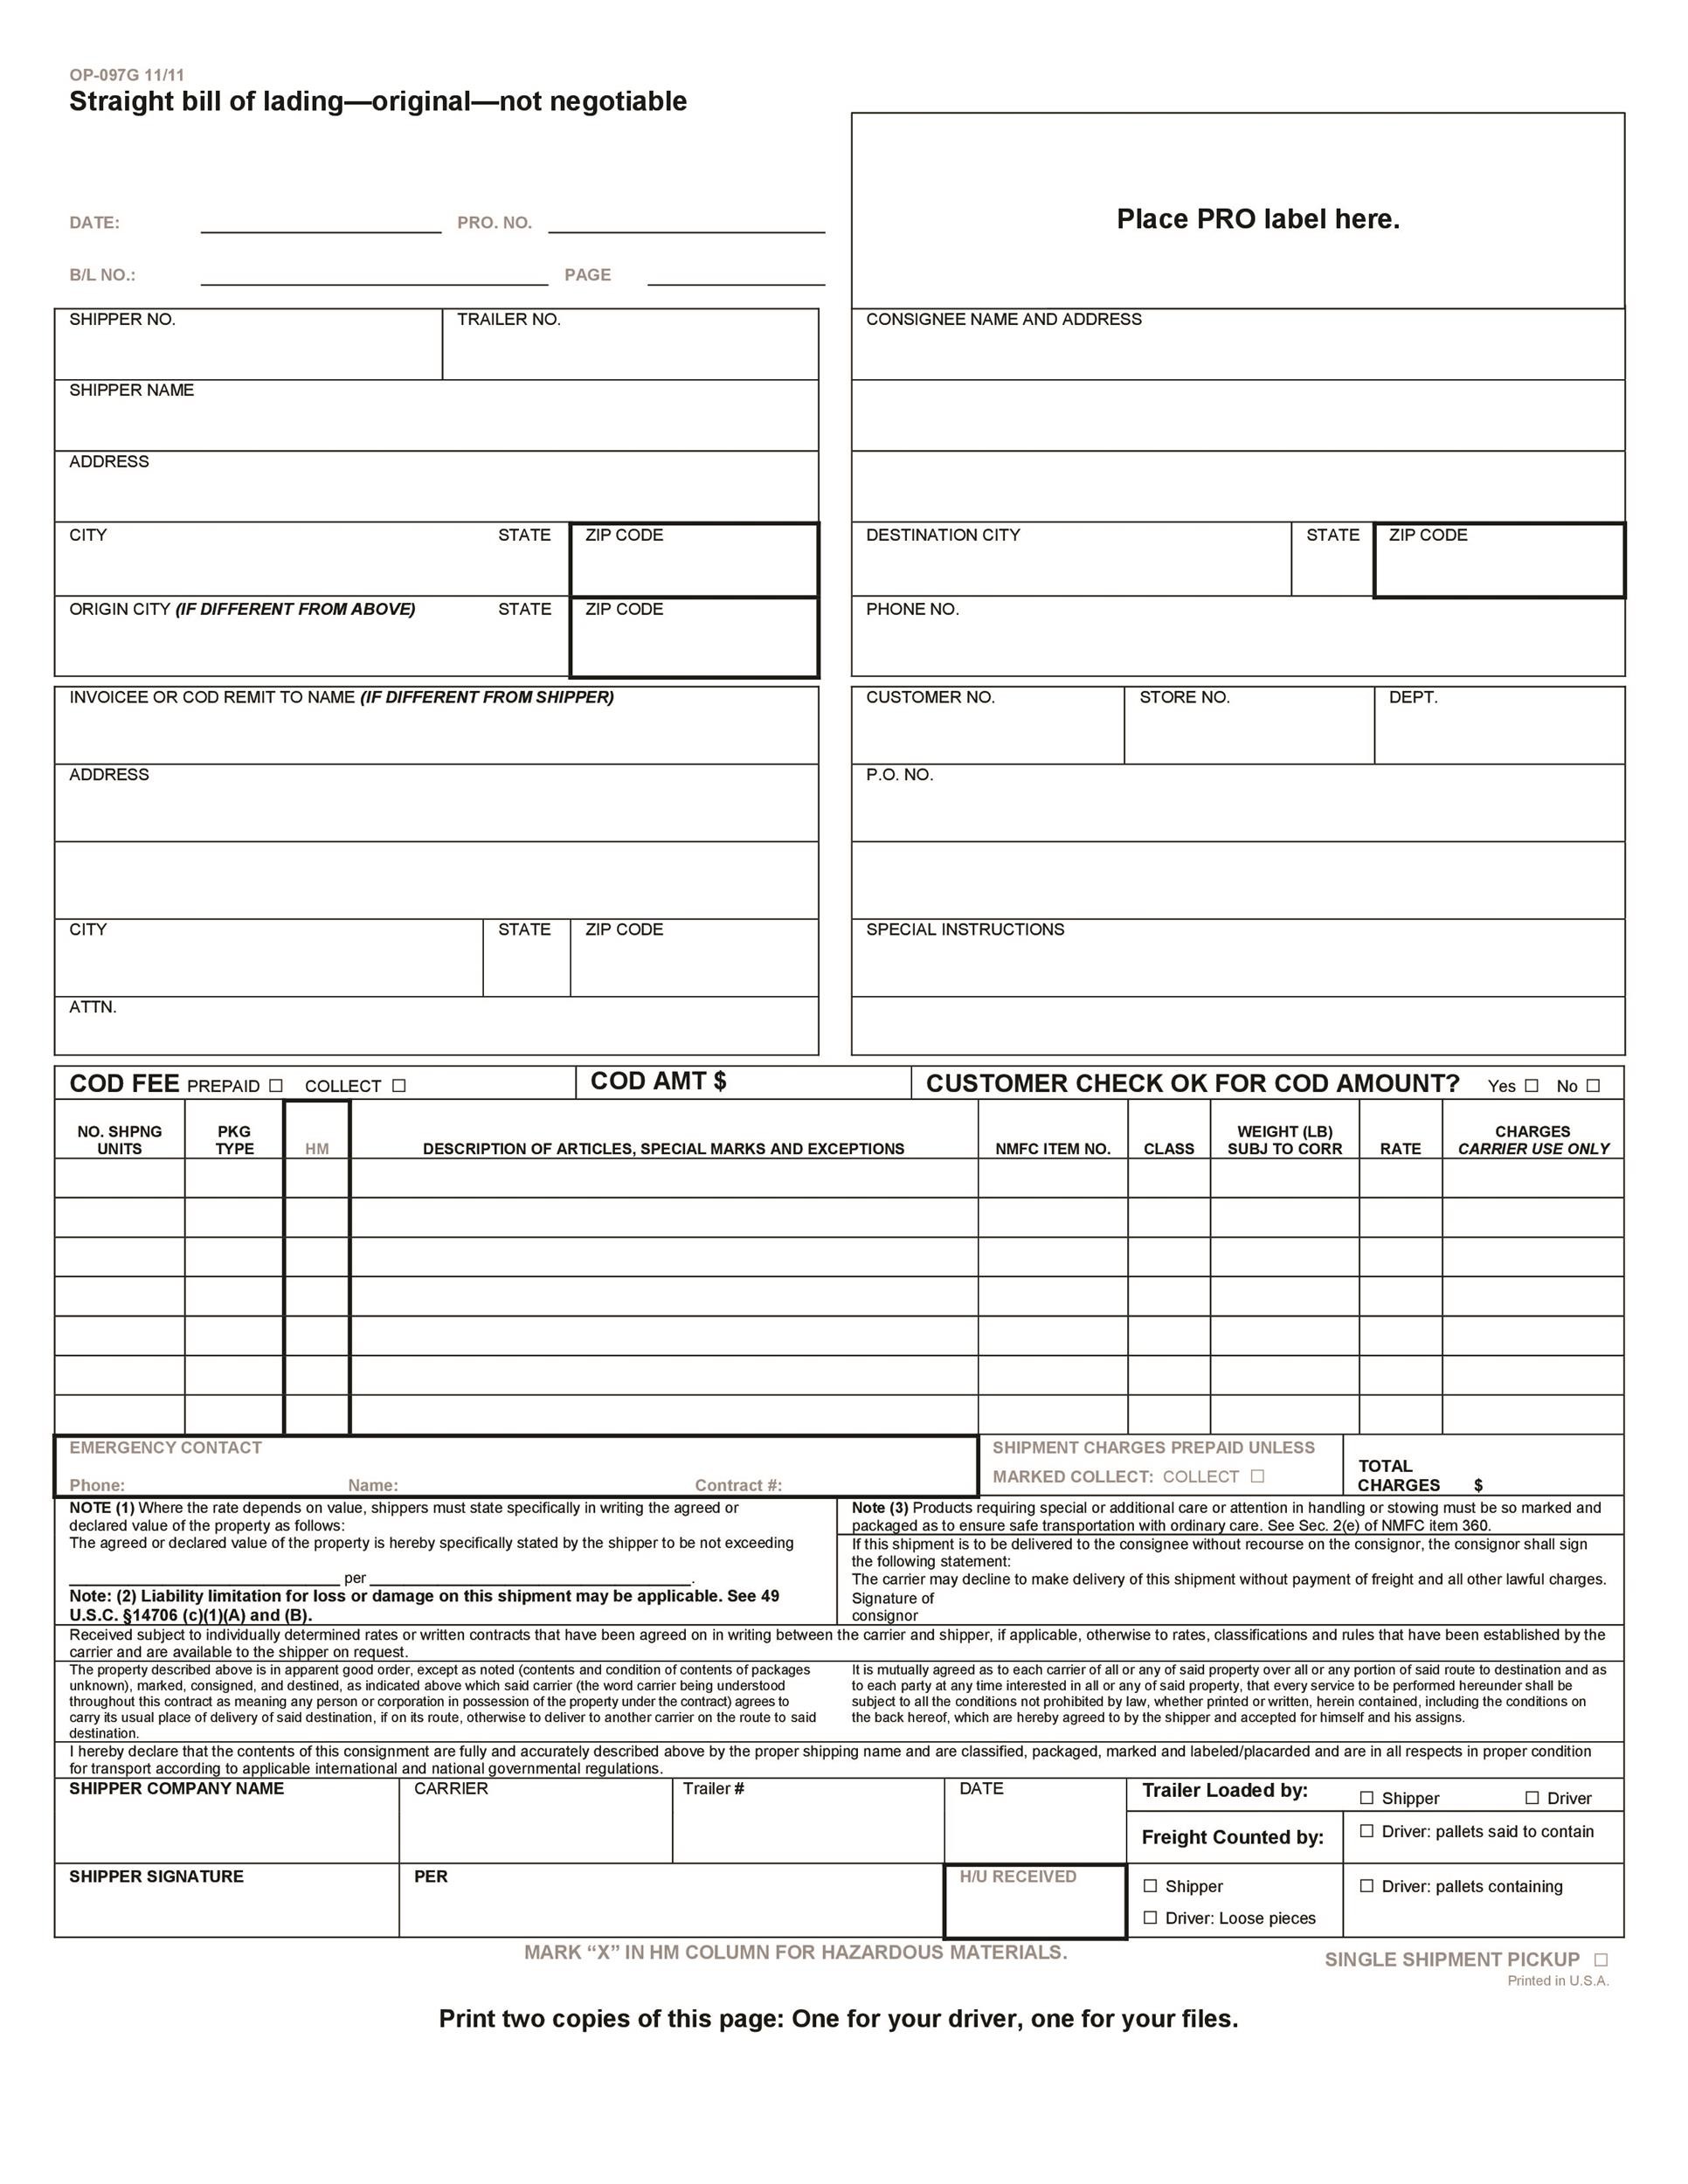 40-free-bill-of-lading-forms-templates-templatelab